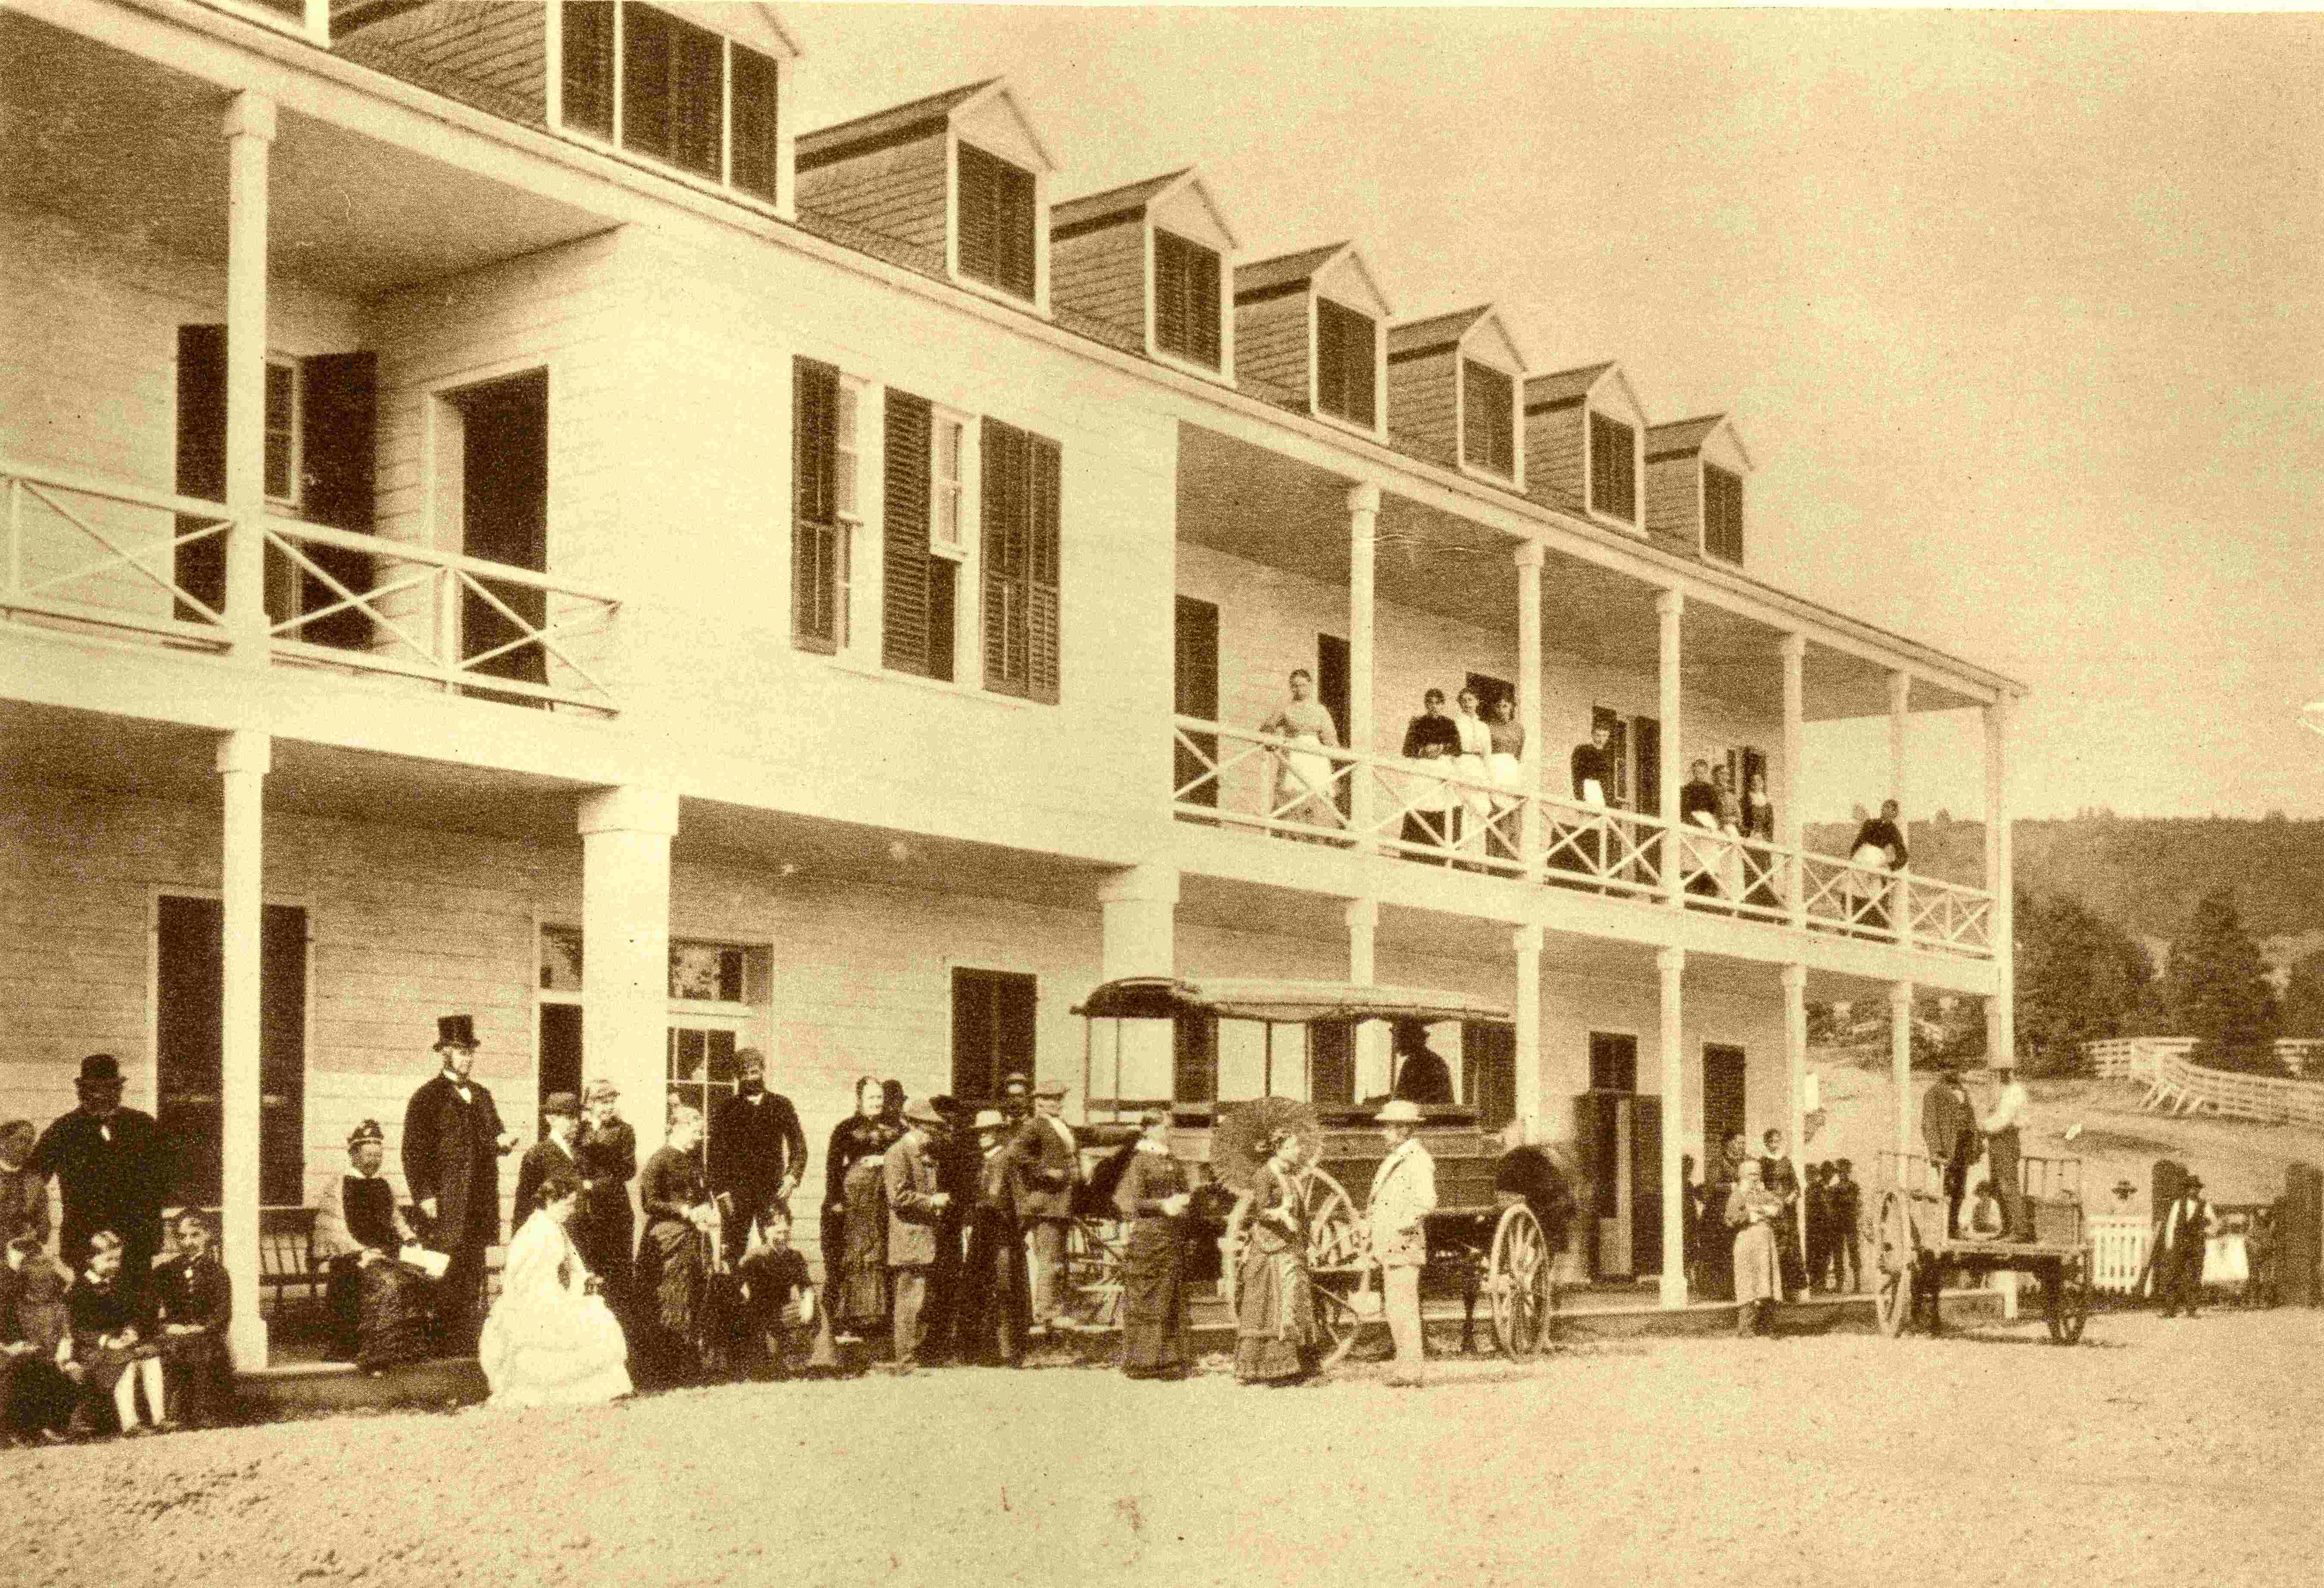 Clients milling in front of a hotel and a horse-drawn omnibus for transporting passengers.